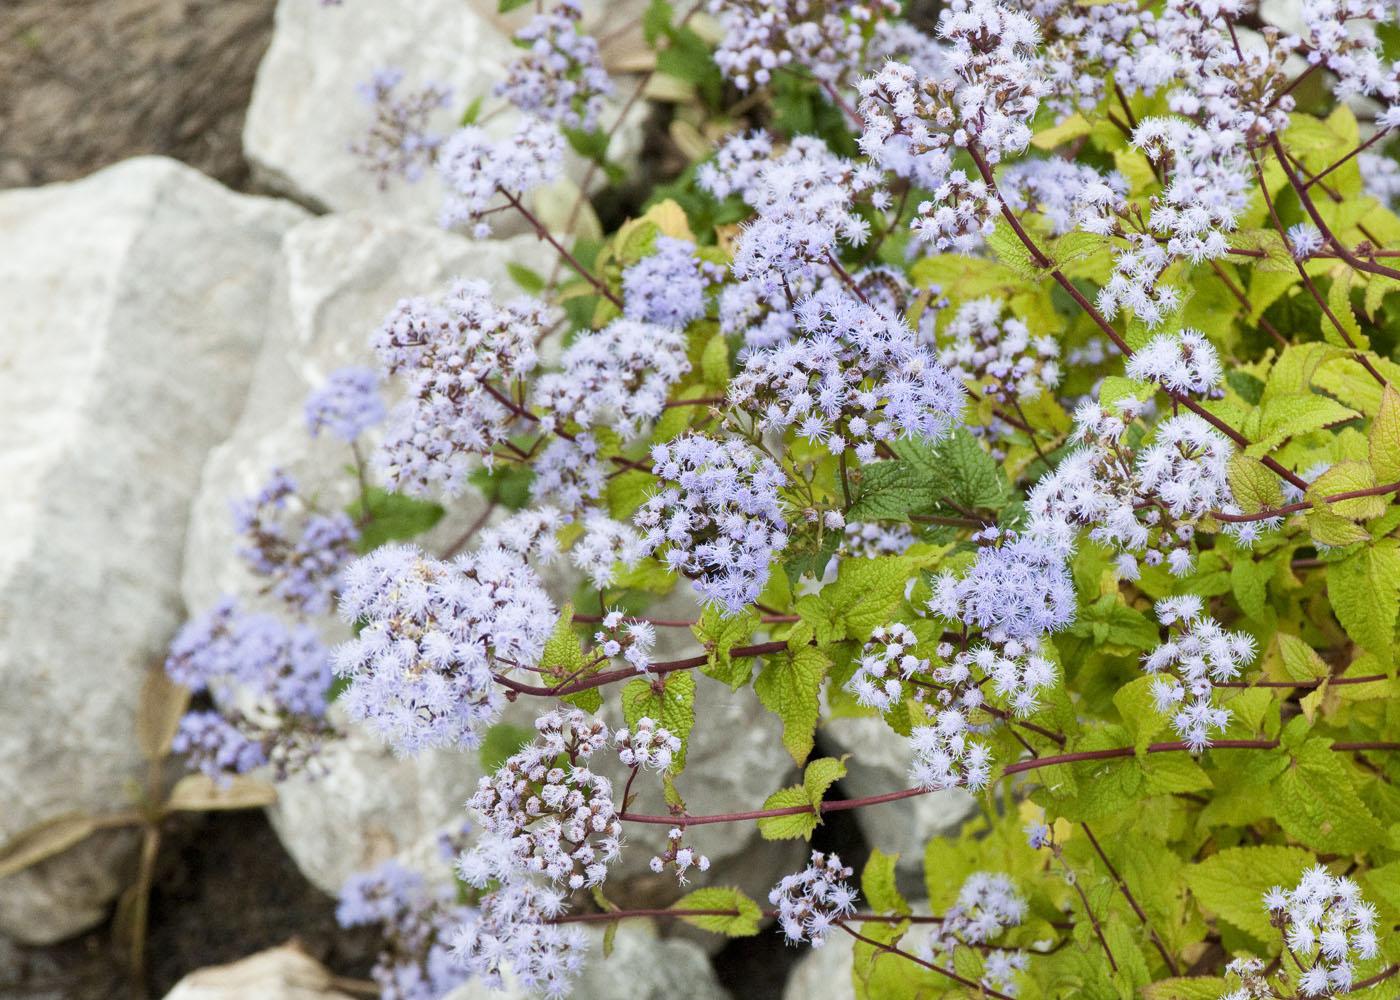 Winter is a good time to evaluate a landscape’s design features. Consider using edging to define beds and provide continuity. Large stones are used to edge this bed of purple ageratum. (Photo by Scott Corey) 